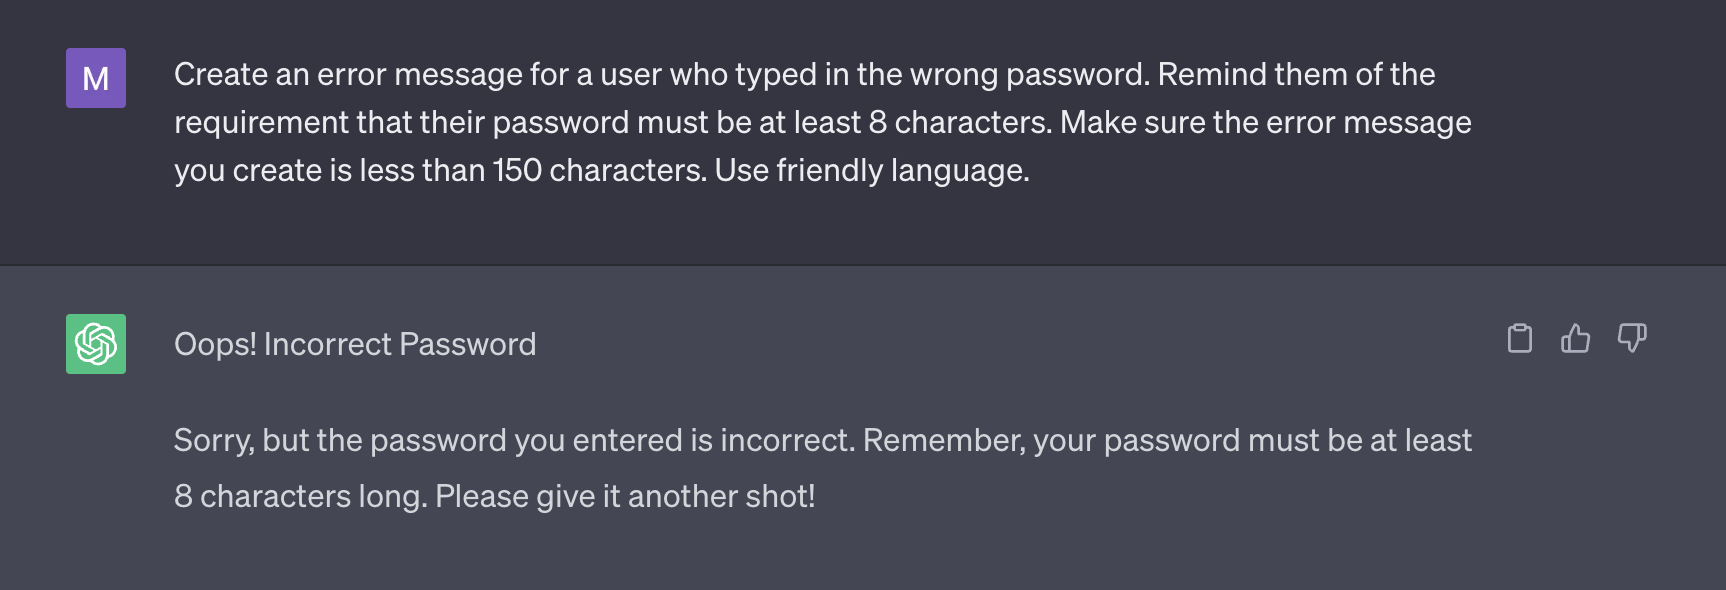 Another AI-generated error message after revisions to the prompt reads: "Oops! Incorrect Password Sorry, but the password you entered is incorrect. Remember, your password must be at least & characters long. Please give it another shot!"